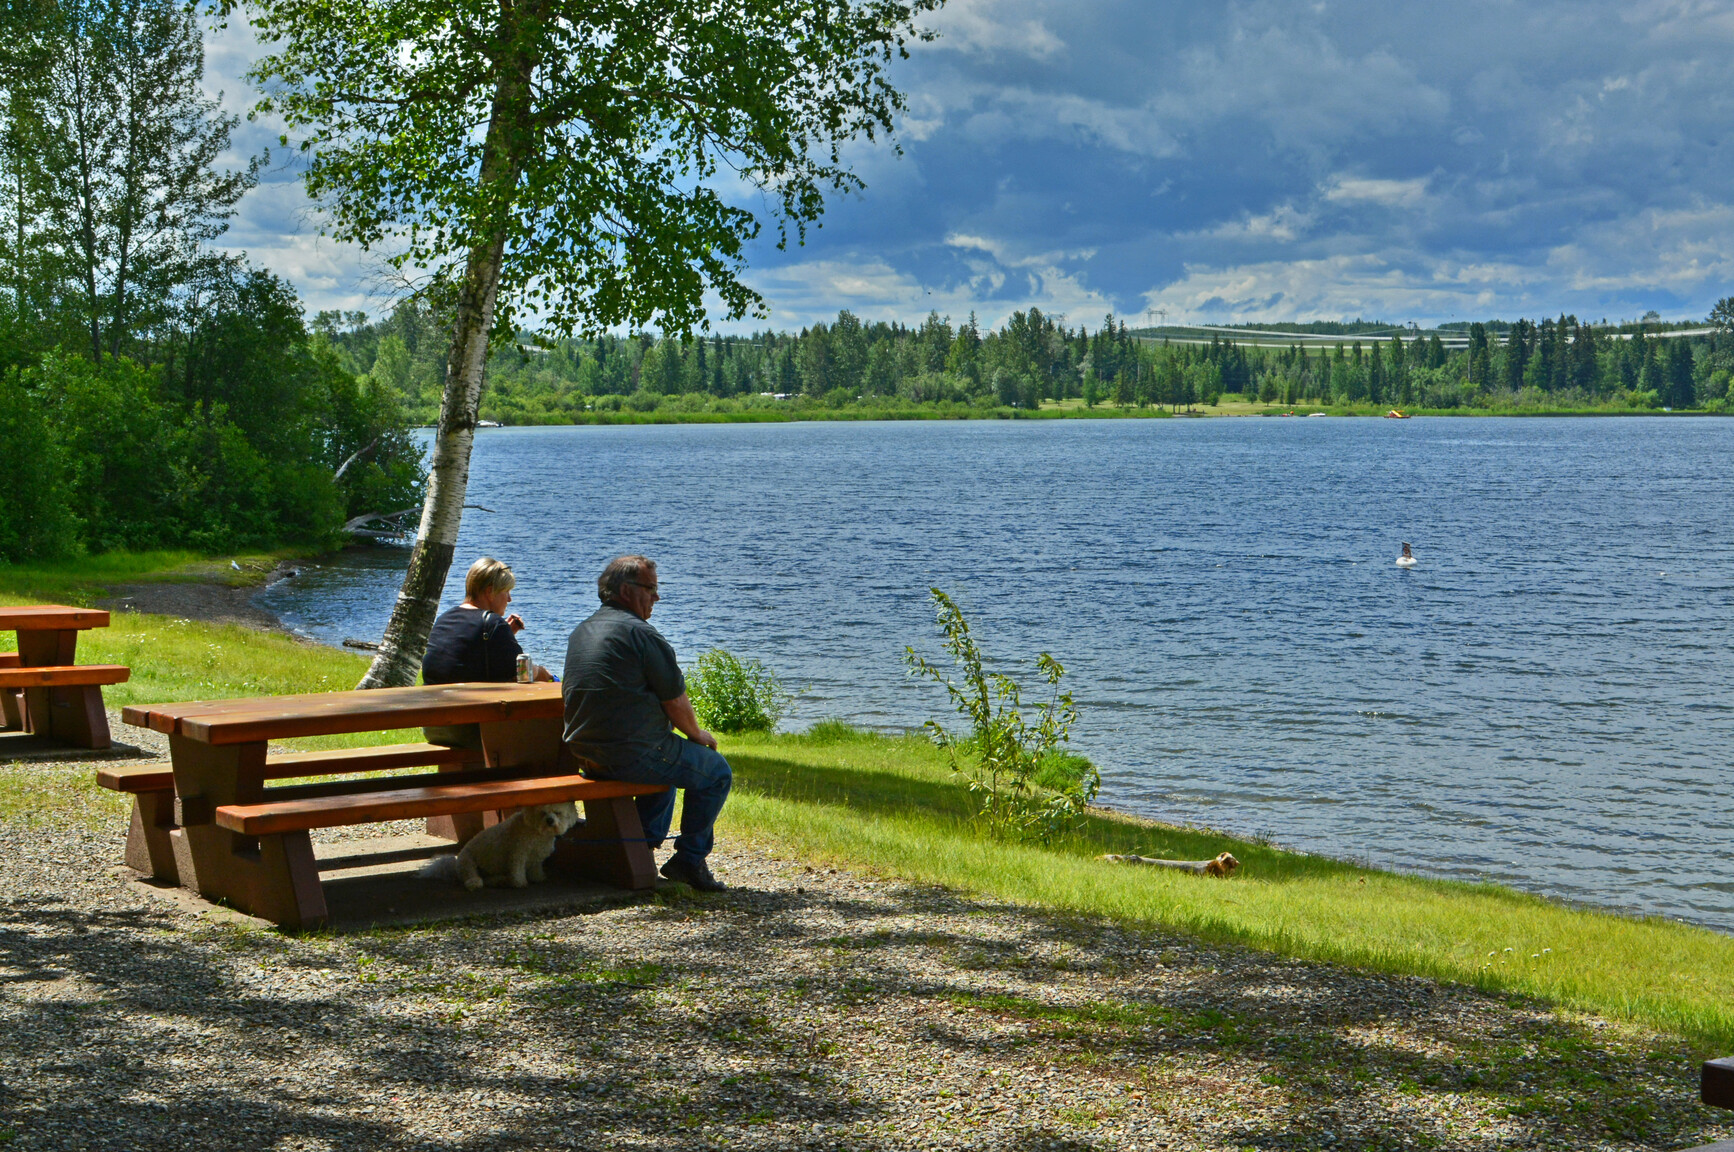 Seated at a picnic table are park visitors looking at the view across the lake.